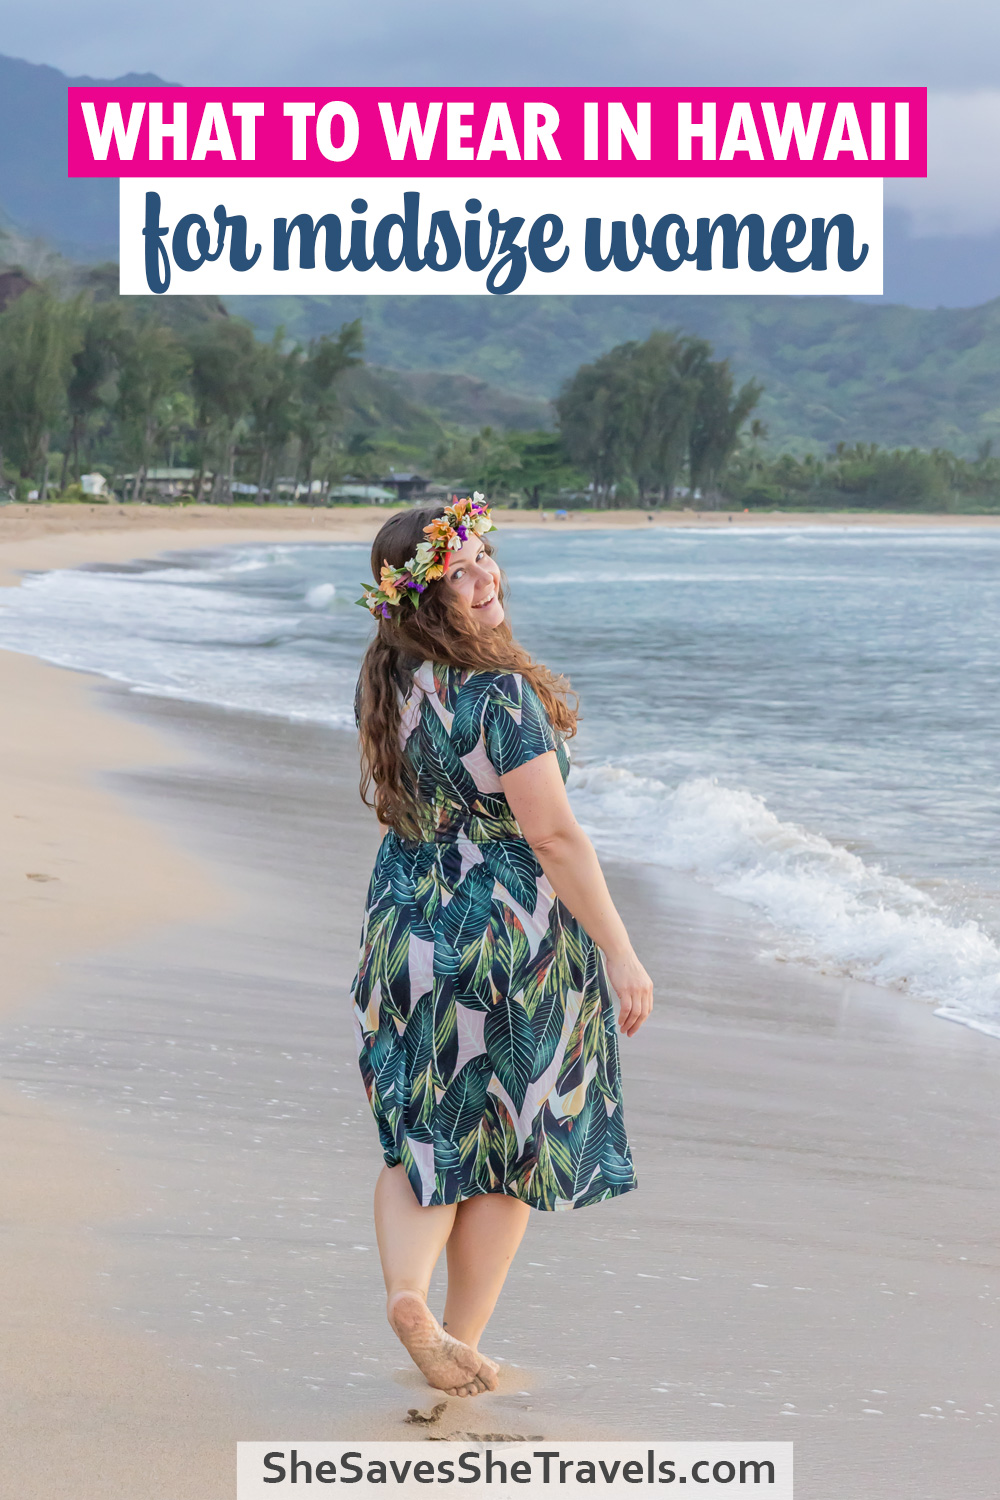 image with woman on beach with text that reads what to wear in Hawaii for midsize women